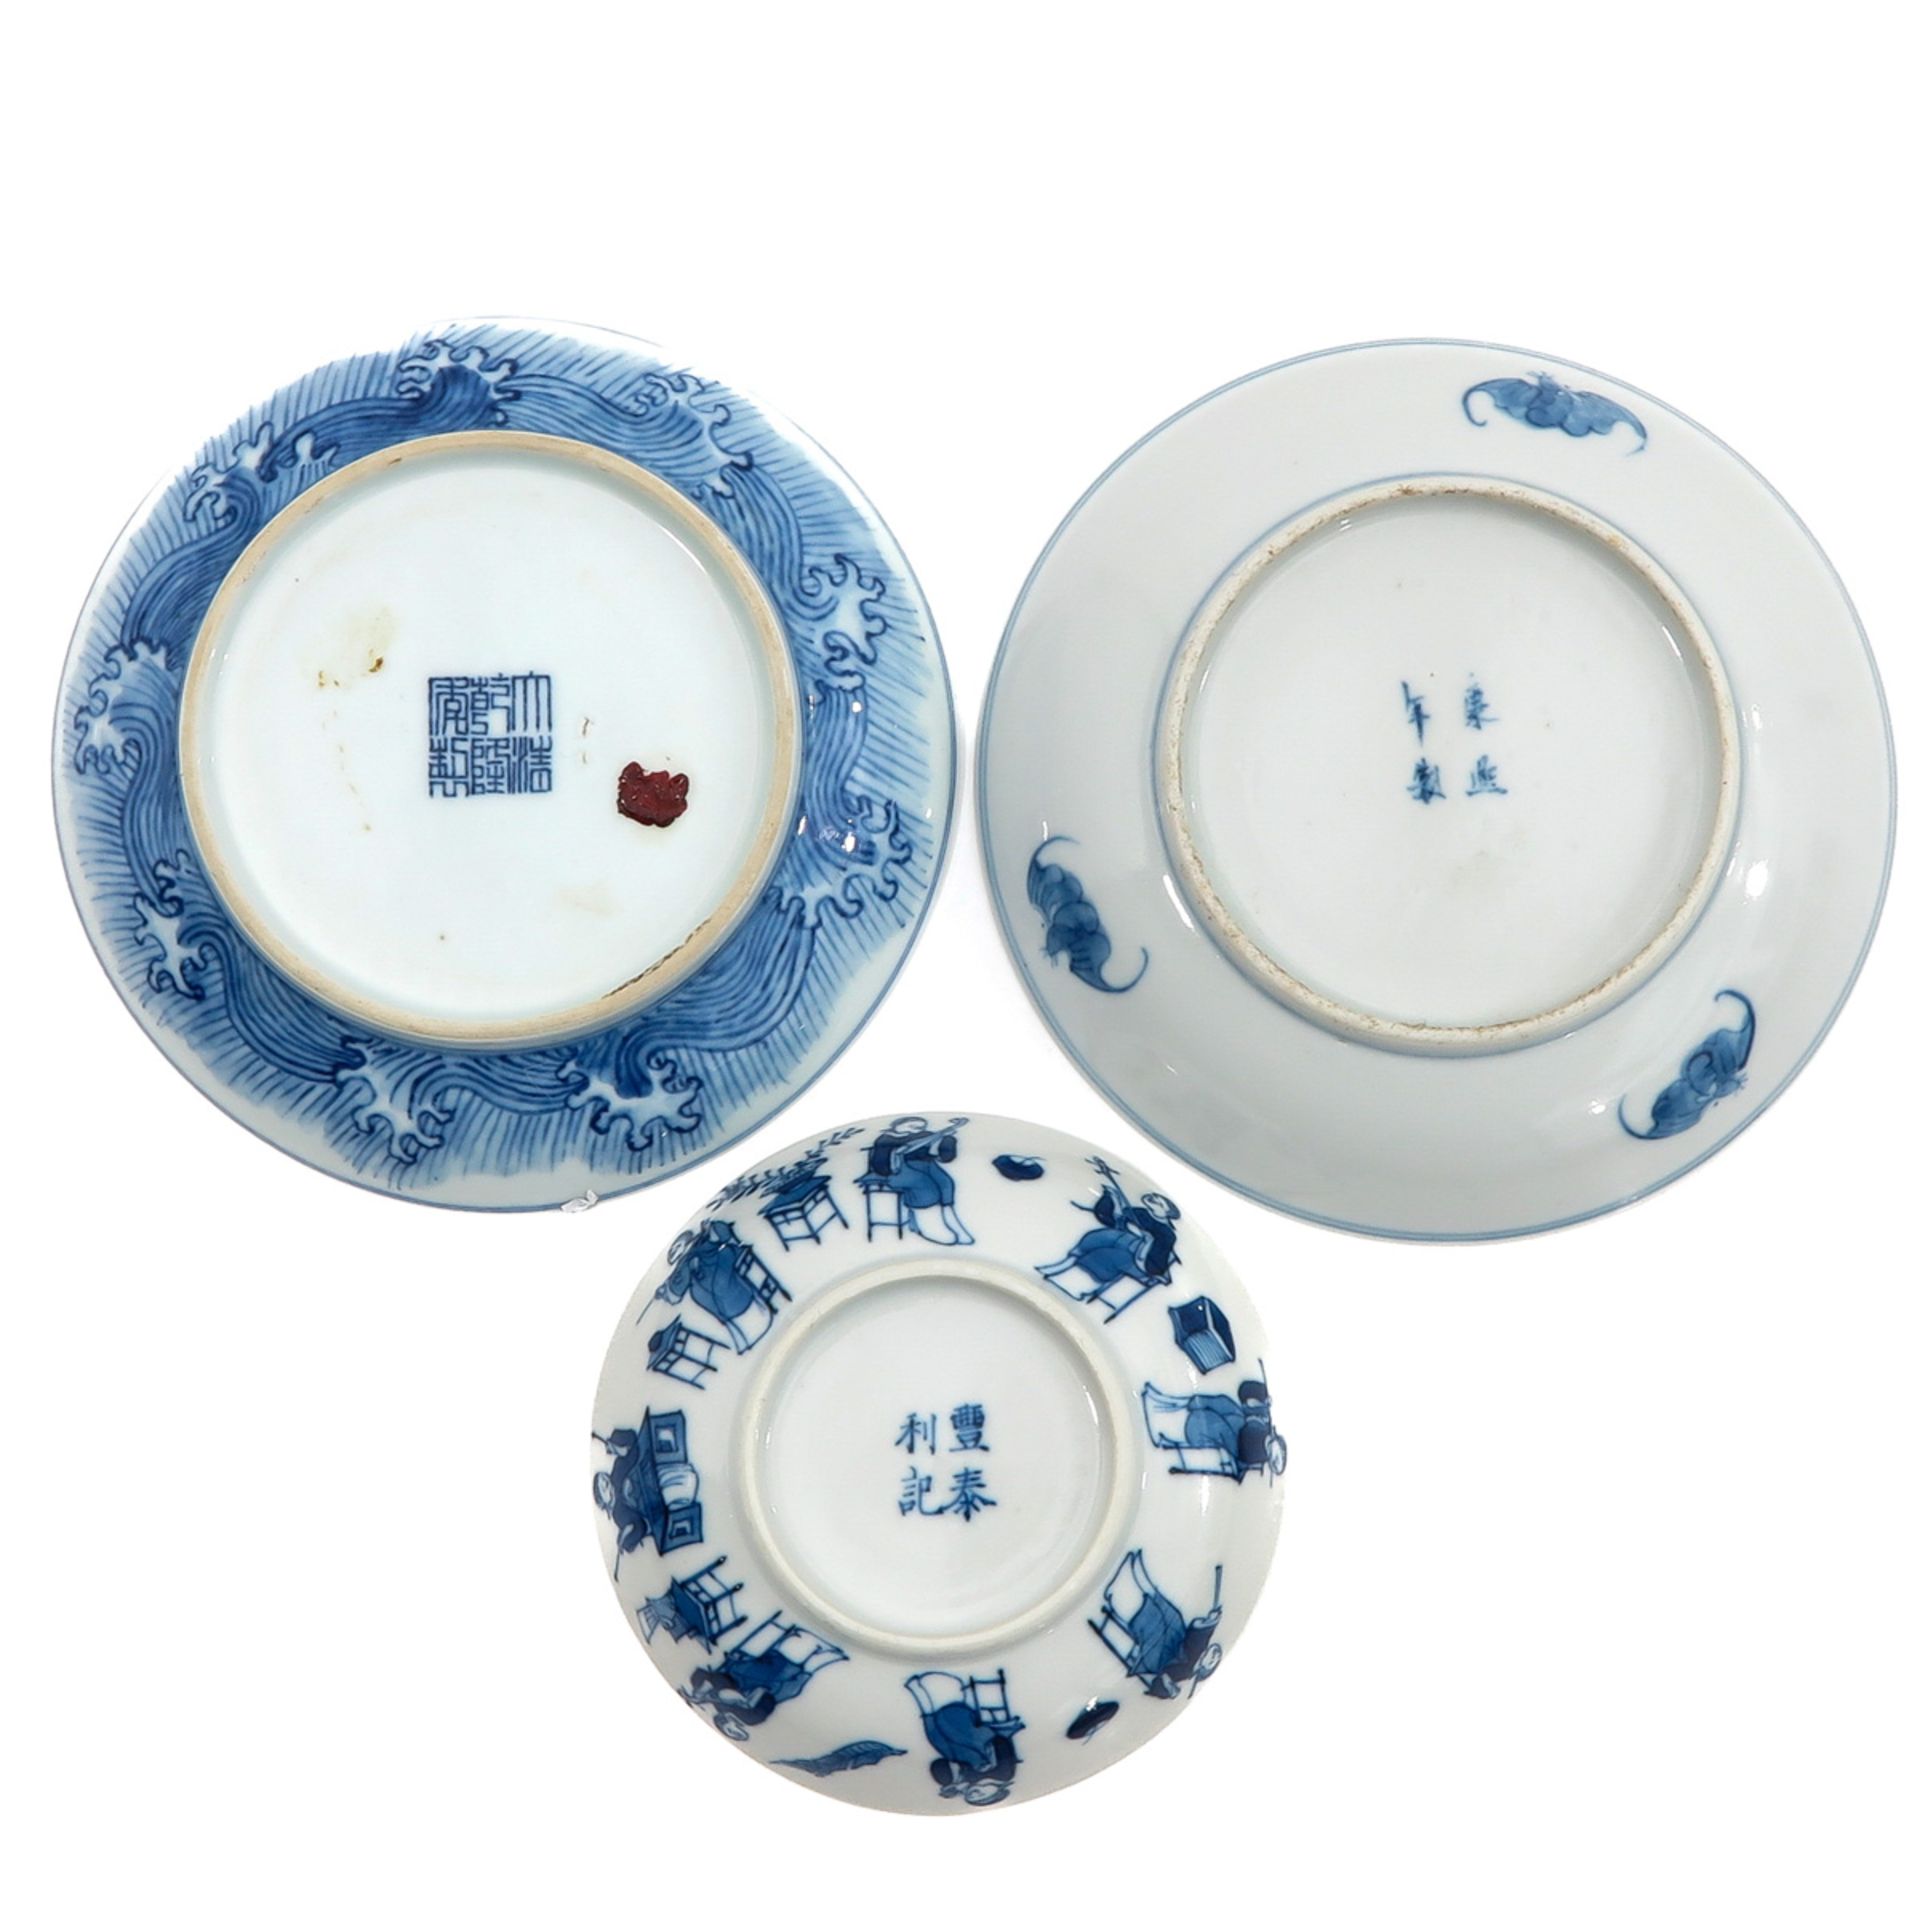 A Collection of 5 Small Plates - Bild 4 aus 10